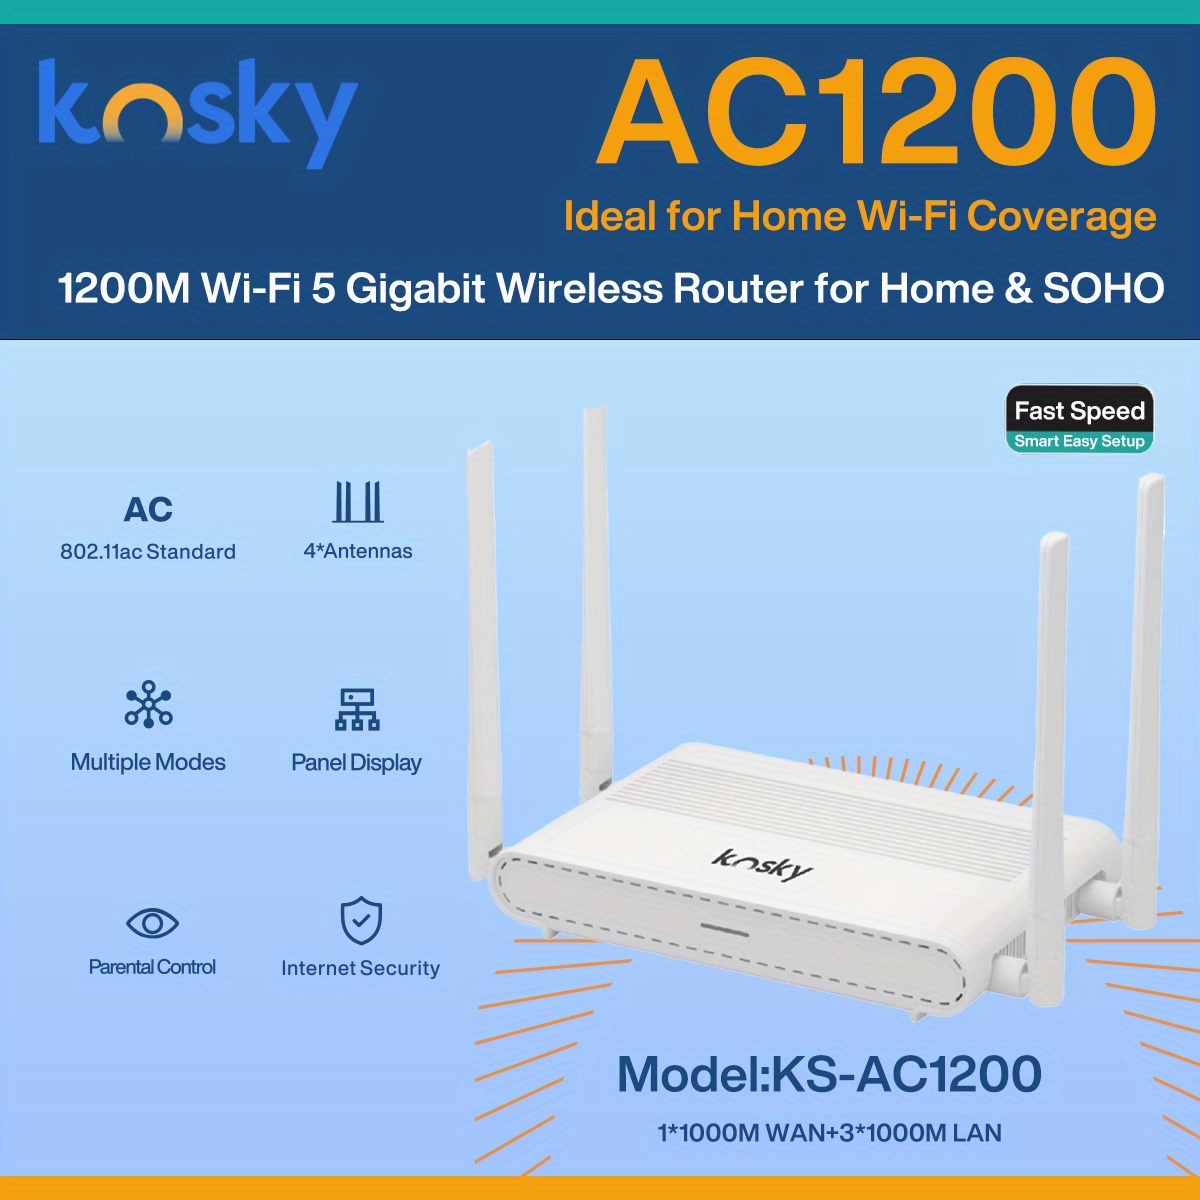 kosky ks ac1200 1200m wi fi 5 gigabit wireless router wi fi 5 wifi router wireless router dual band 2 4g 5g ac1200 1200m full gigabit 1x gigabit wan 3x gigabit lan 4 x antennas long range coverage supports guest wifi router mpde access point mode repeater mode ipv6 parental control for home and soho details 0